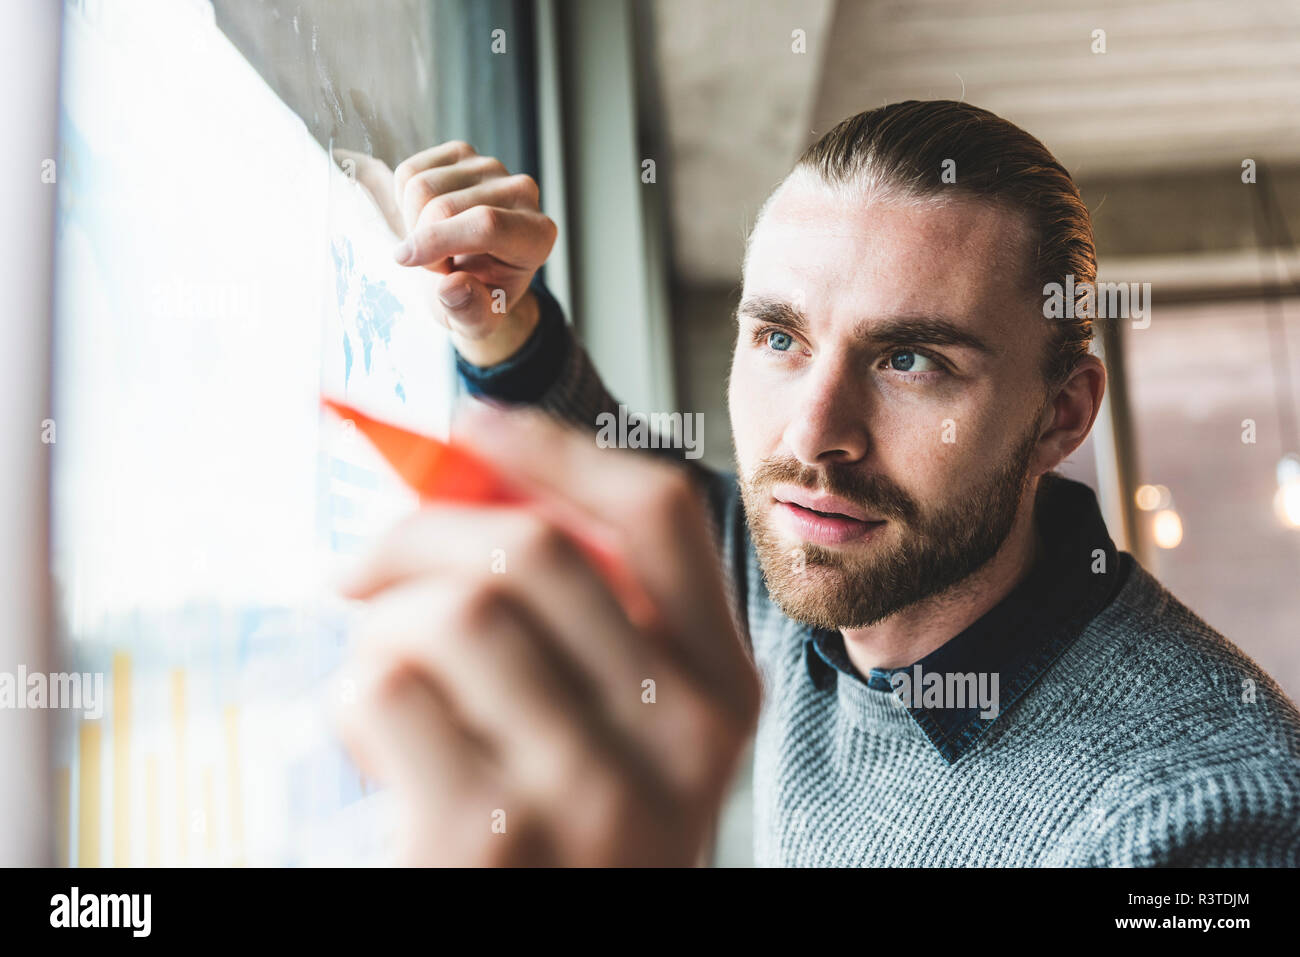 Young businessman working on data at windowpane Stock Photo